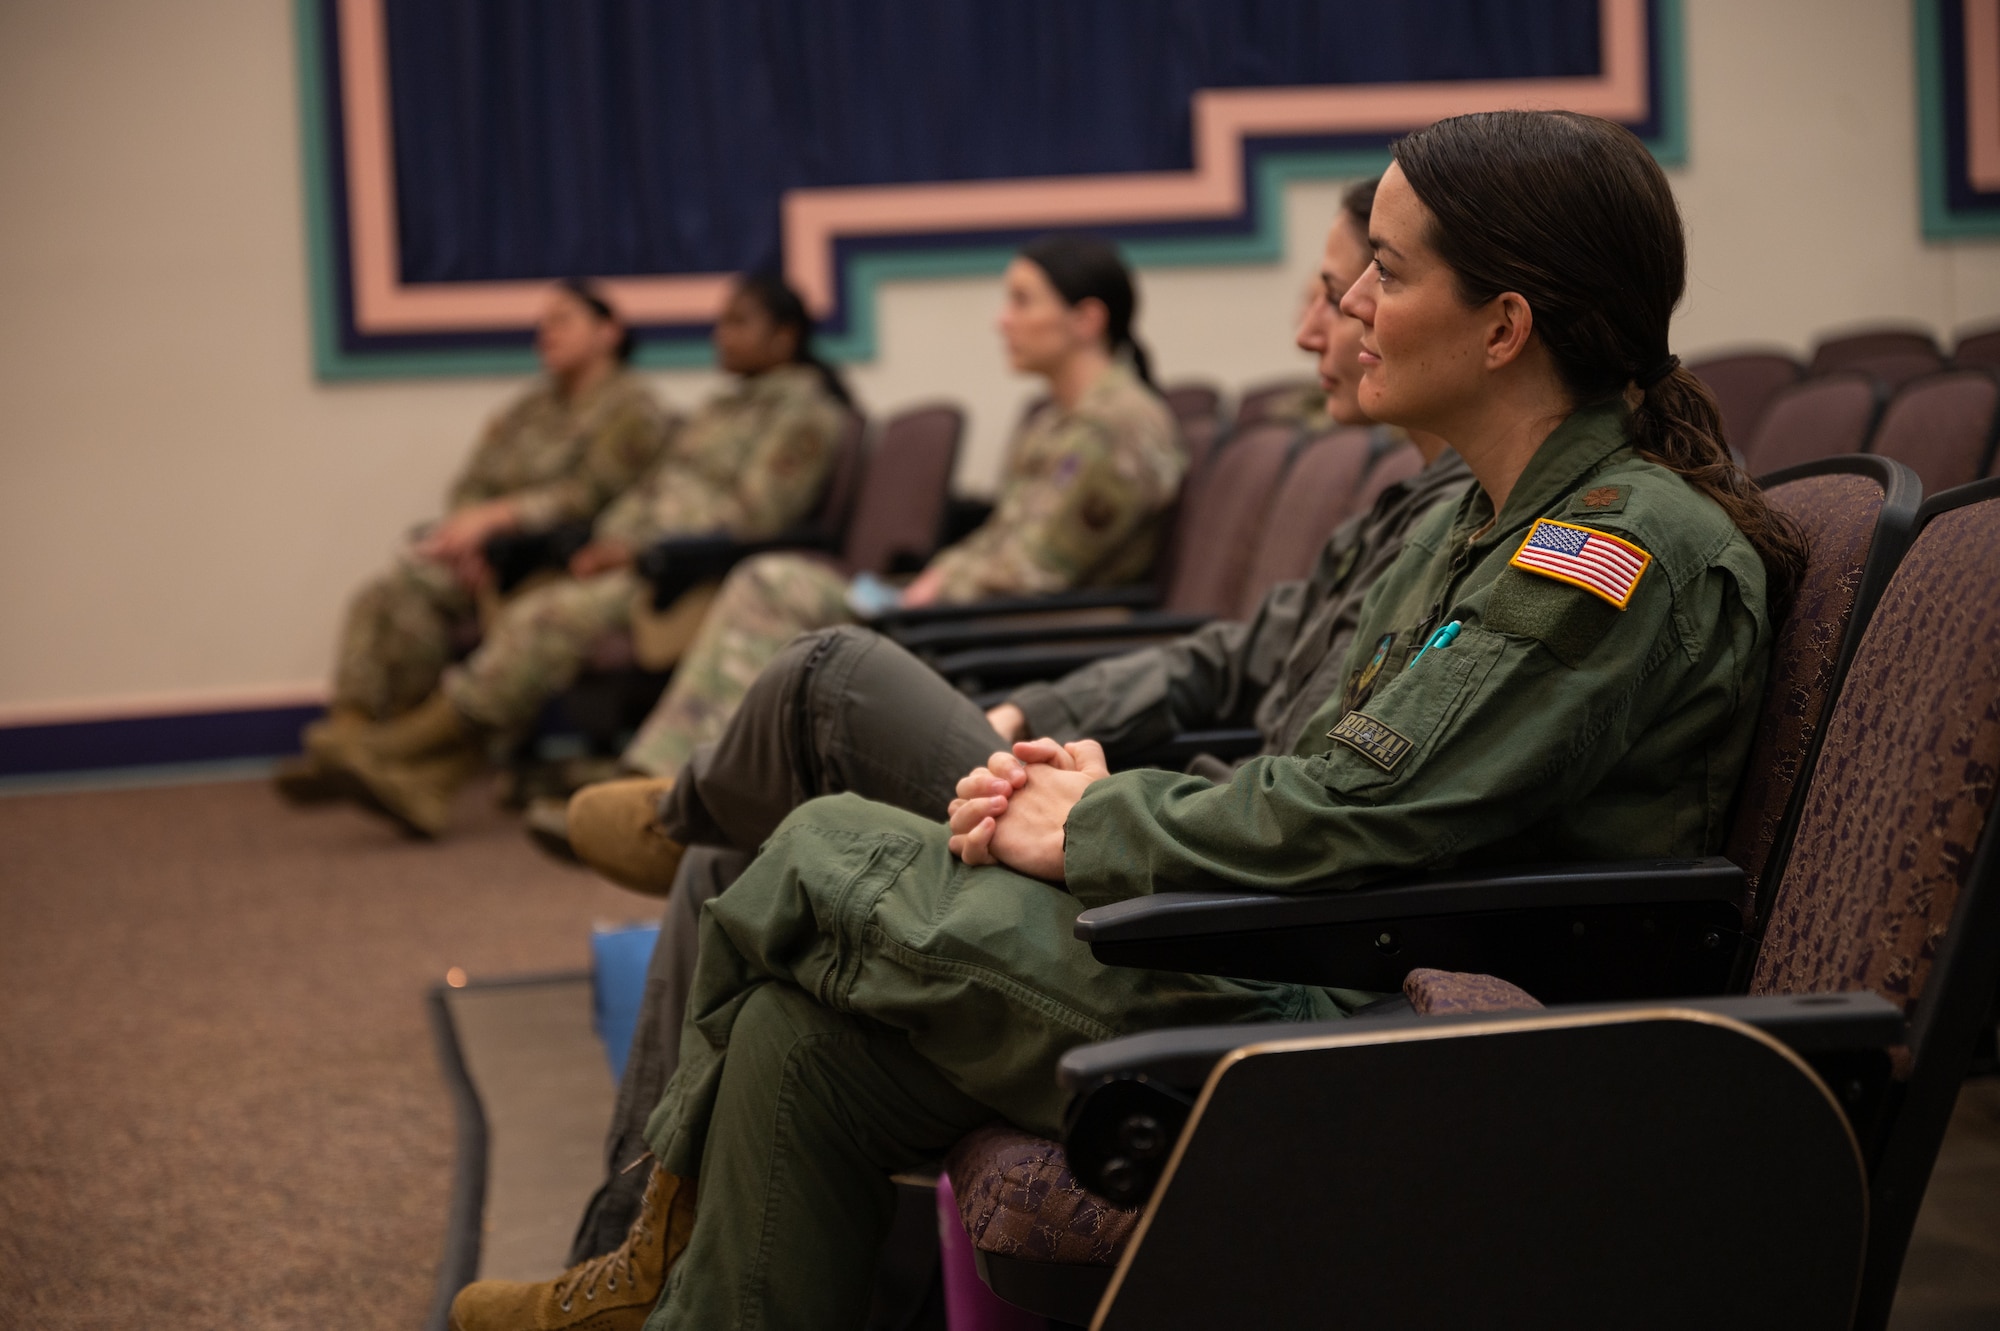 U.S. military members sit in theater seating while observing a womens history month panel